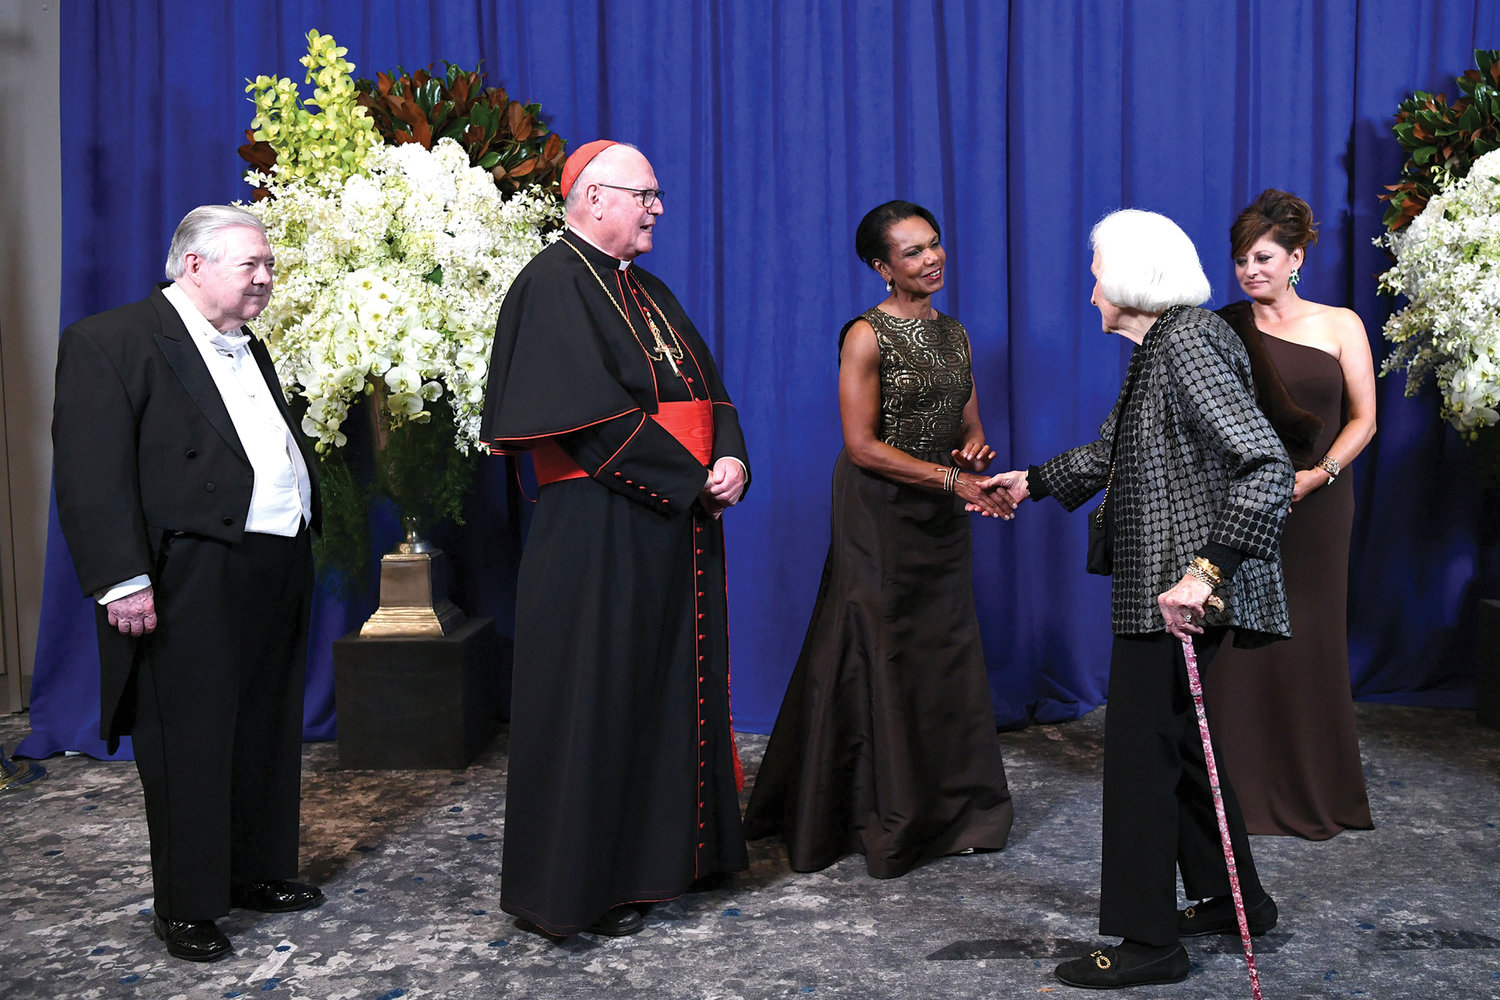 Honored guests line up in the receiving line for the 76th annual Alfred E. Smith Memorial Foundation Dinner Oct. 21 at the Javits Center in Manhattan. From left, Frank Bennack, Jr., Cardinal Dolan, Condoleezza Rice and journalist Maria Bartiromo, mistress of ceremonies.